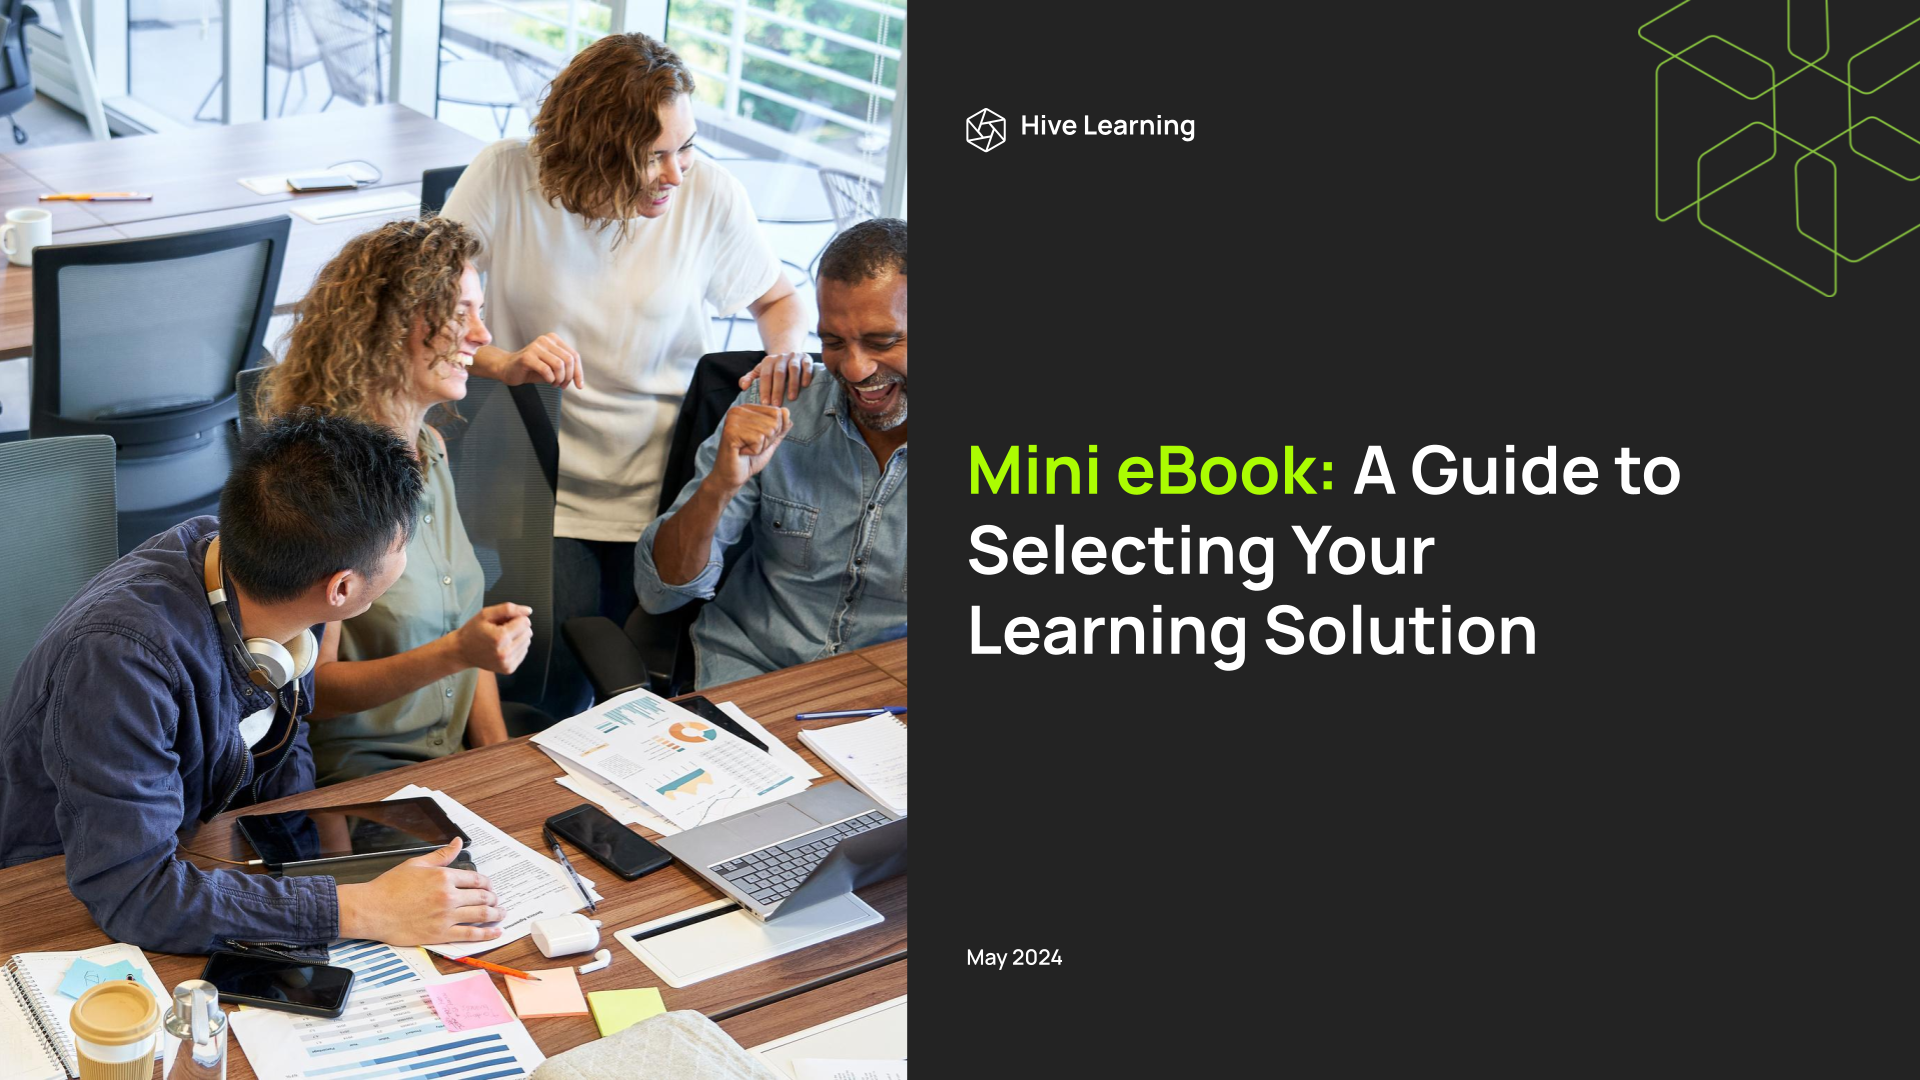 Hive Learning - Mini eBook A Guide to Selecting Your Learning Solution (US))